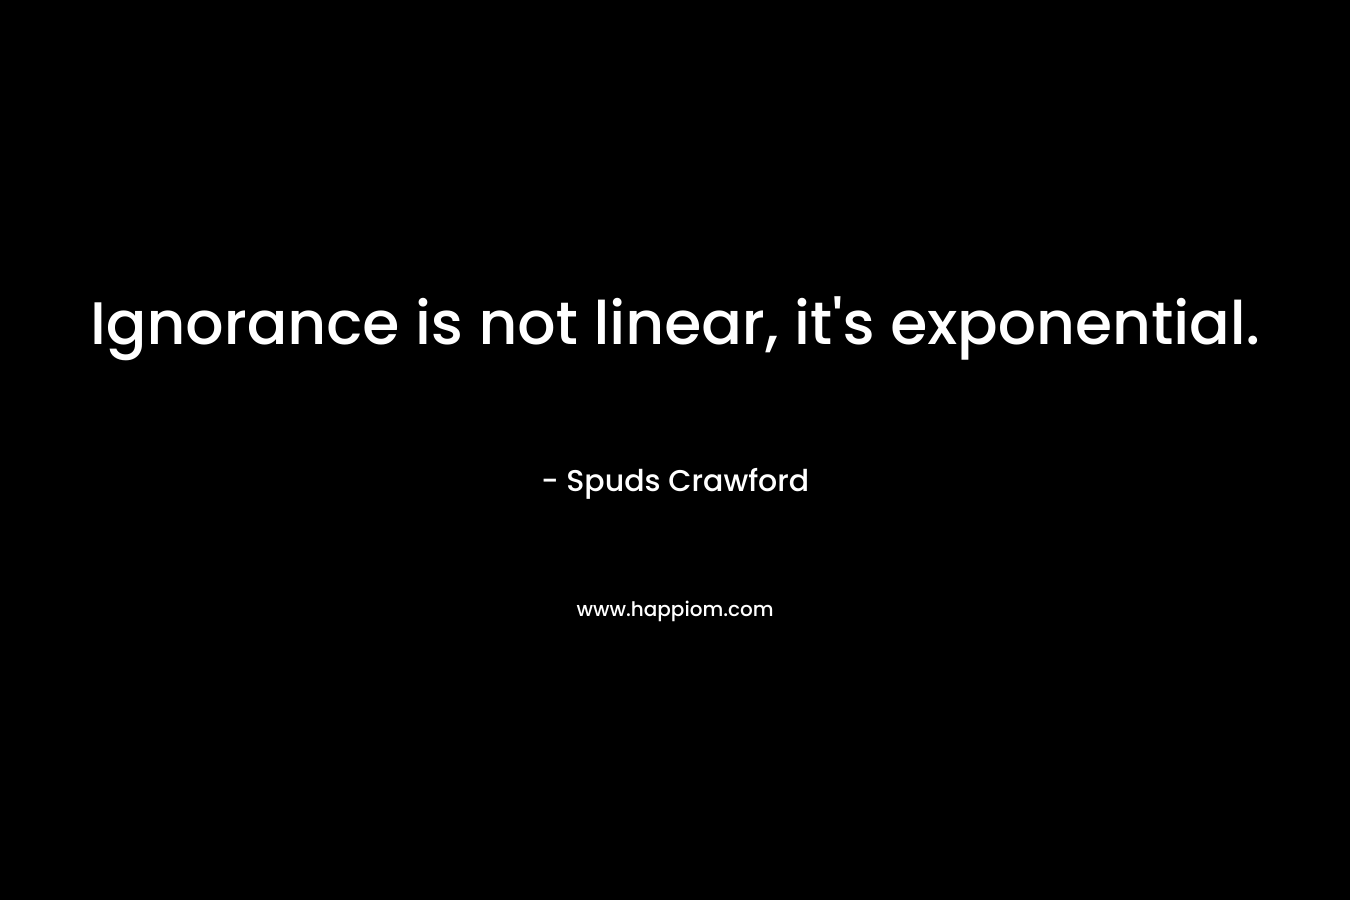 Ignorance is not linear, it's exponential.